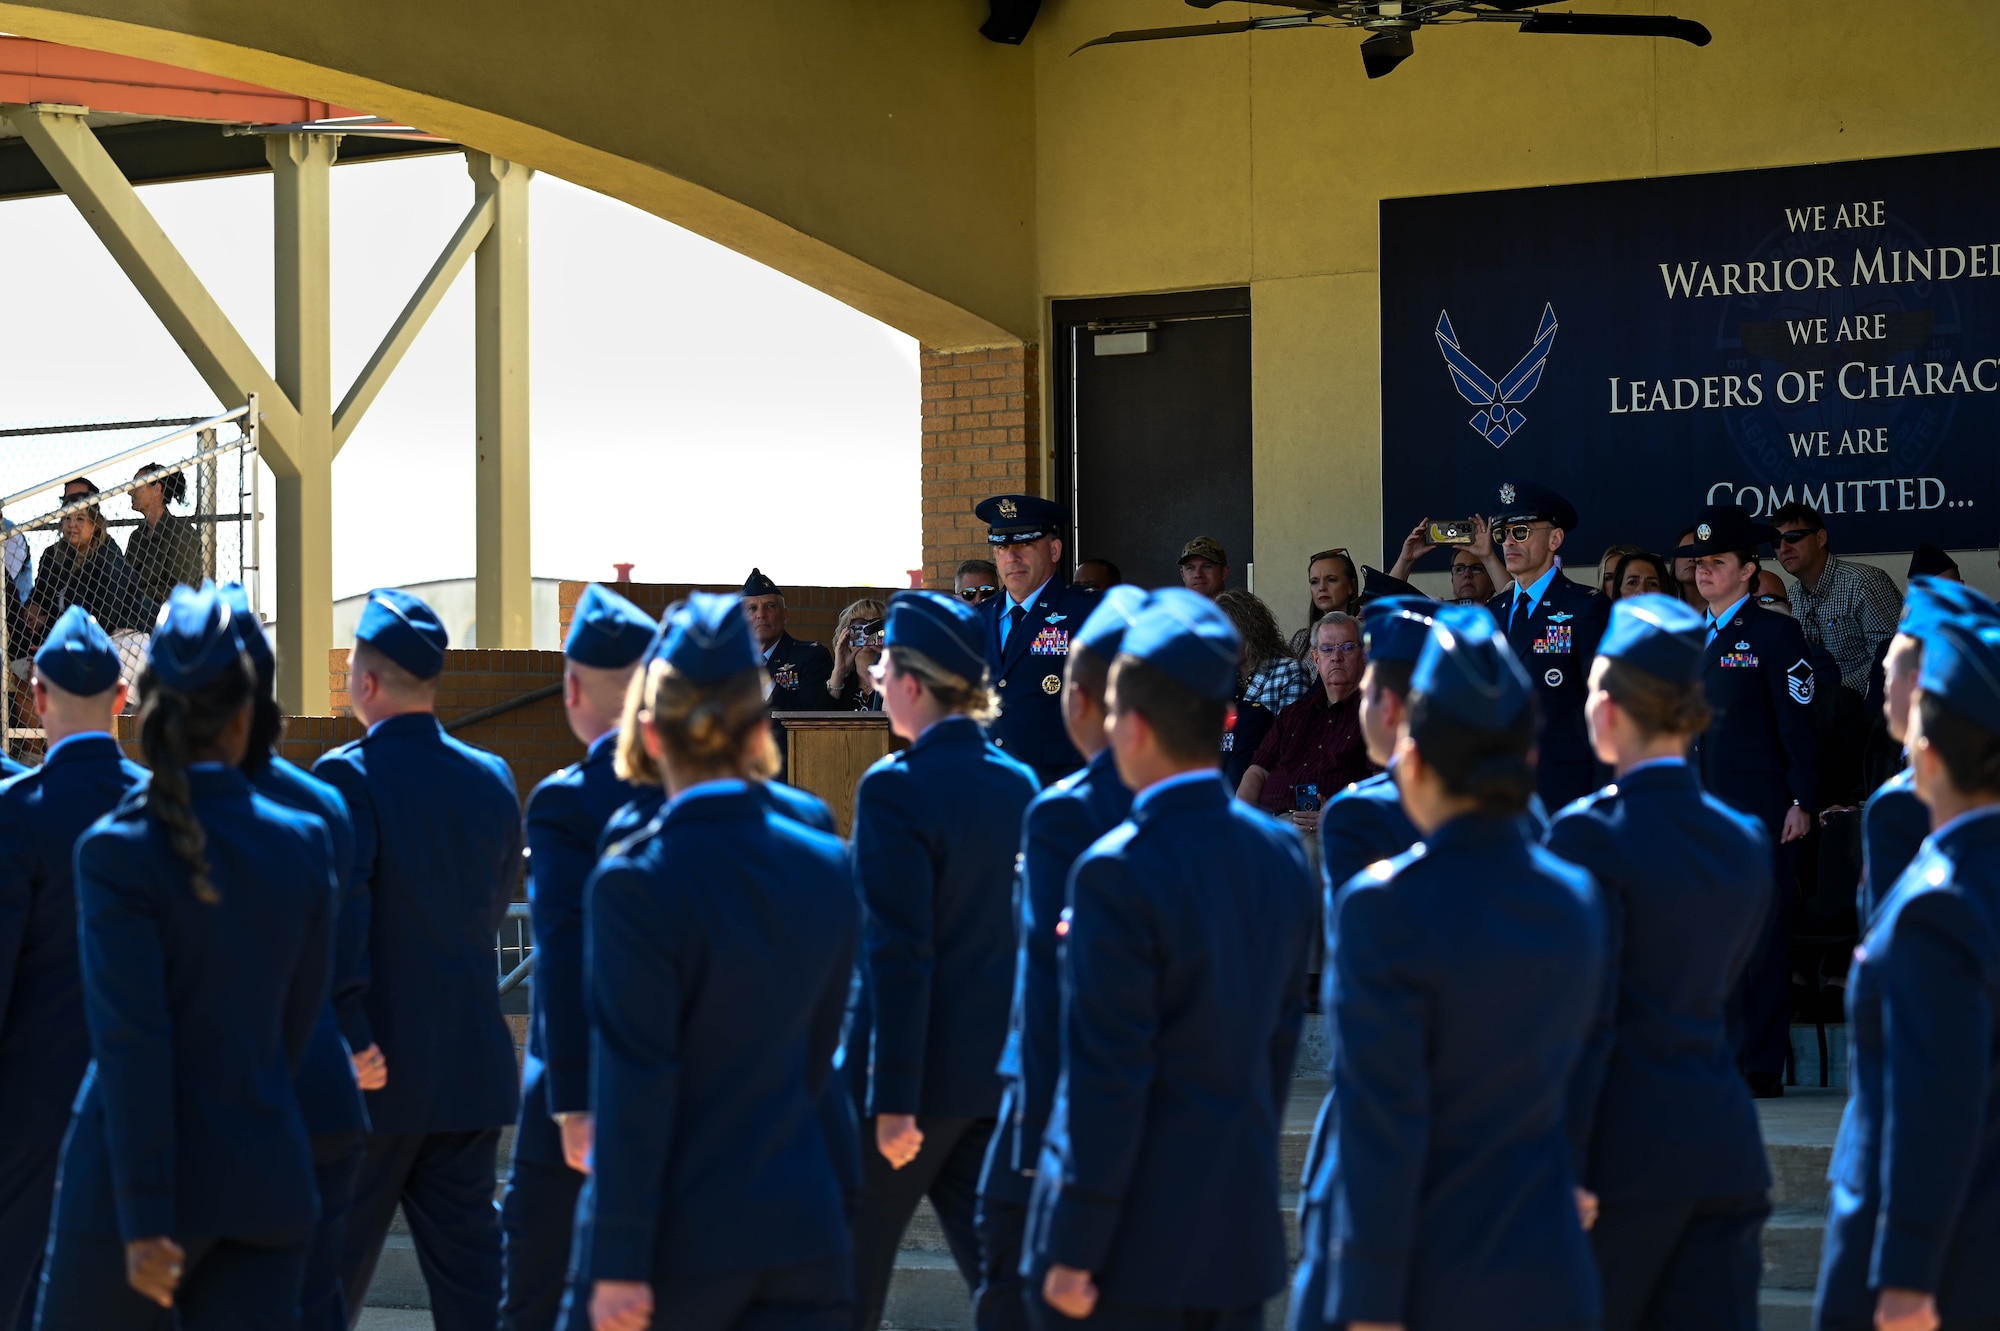 U.S. Air Force Col. Josh Koslov, 350th Spectrum Warfare Wing commander, reviews U.S. Air Force Officer Training School trainees during their pass and review, part of the graduation parade at Maxwell Air Force Base, AL, March 28, 2024. The program consists of five modules that build upon each other and emphasis teamwork, communication, decision-making, resiliency, creative thinking and accountability. (U.S. Air Force photo by Capt. Benjamin Aronson)